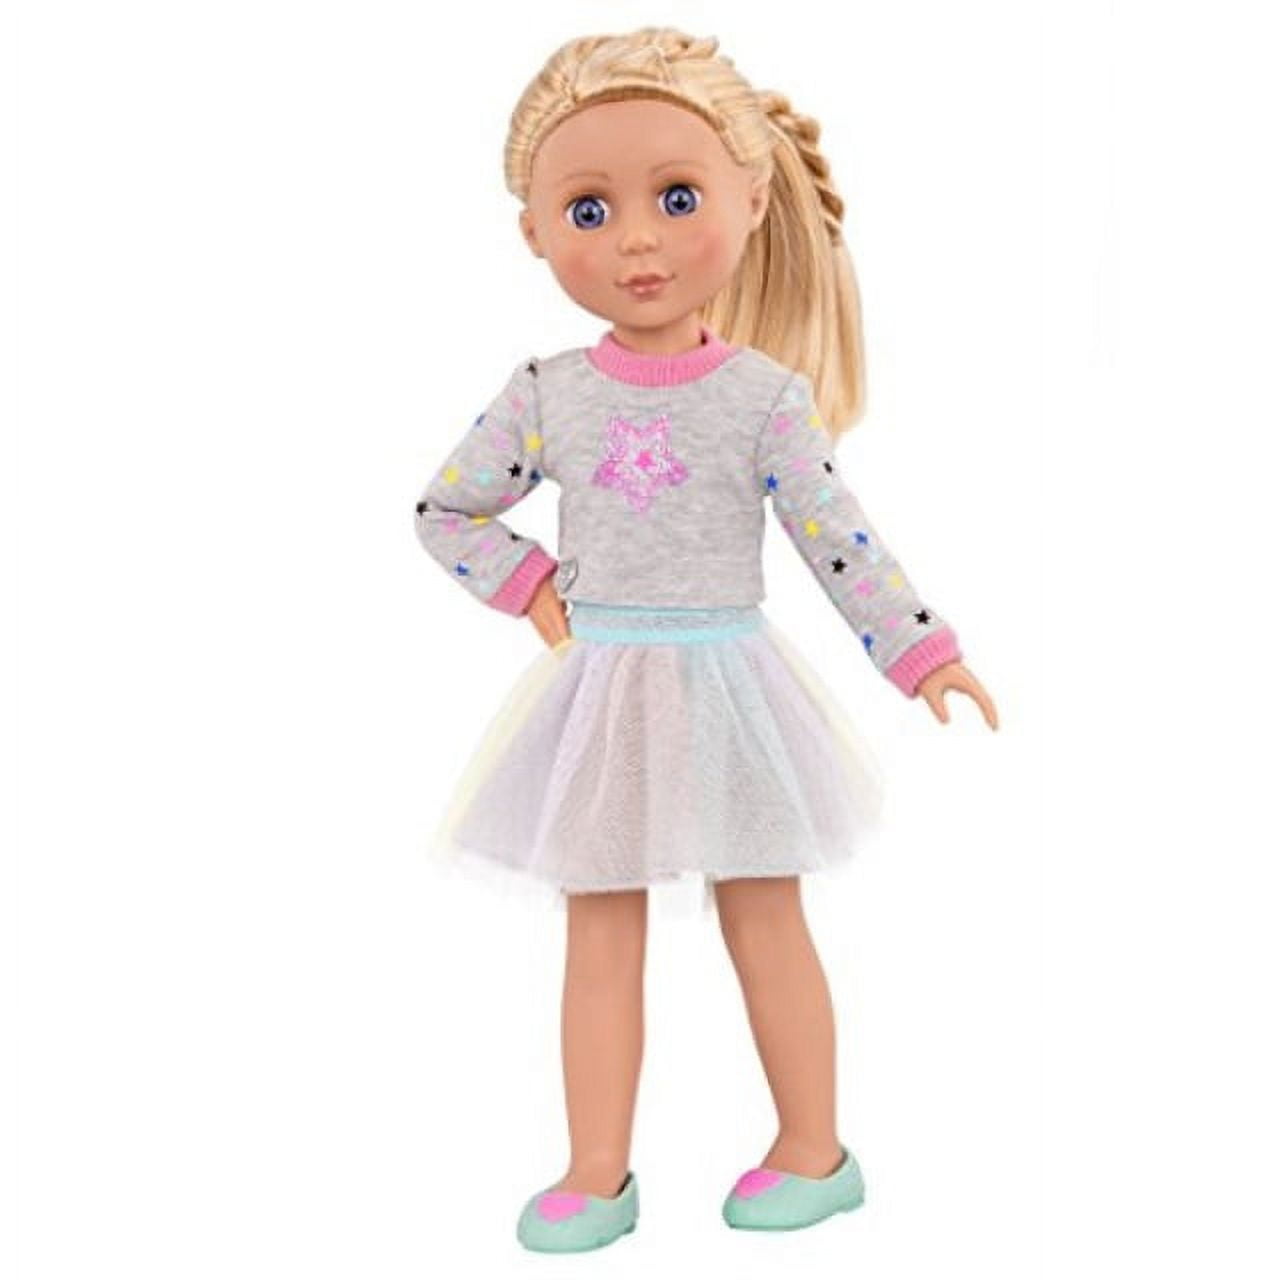 Glitter Girls by Battat - Shine Bright Outfit -14-inch Doll Clothes Toys